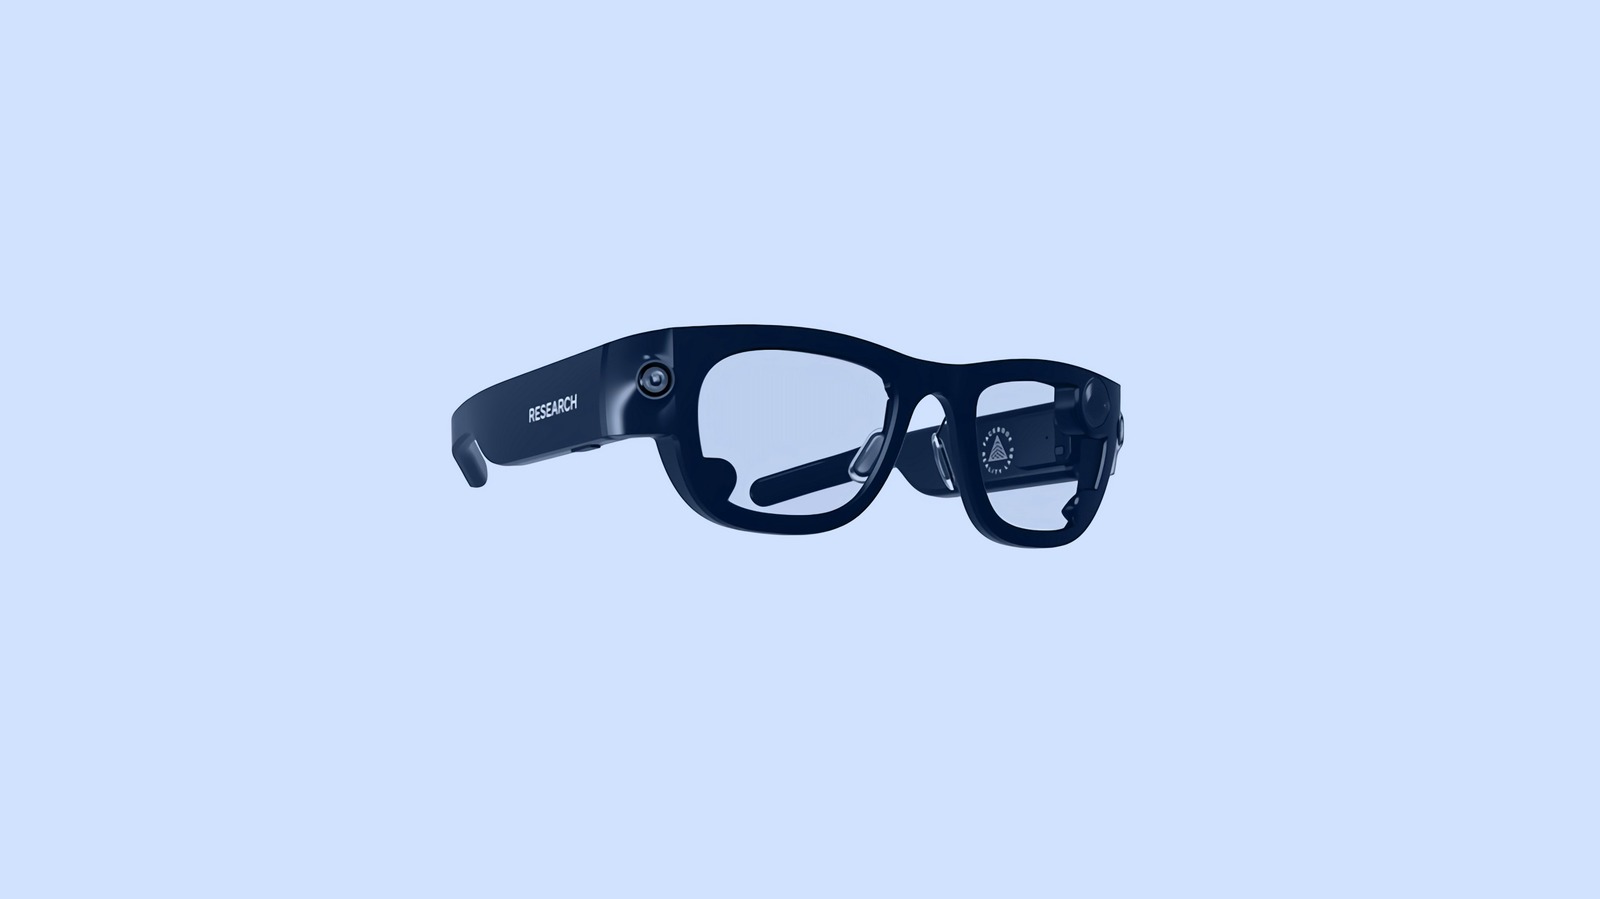 https://www.slashgear.com/img/gallery/meta-planning-ar-glasses-for-2024-could-this-be-zuckerbergs-iphone-moment/l-intro-1649879198.jpg